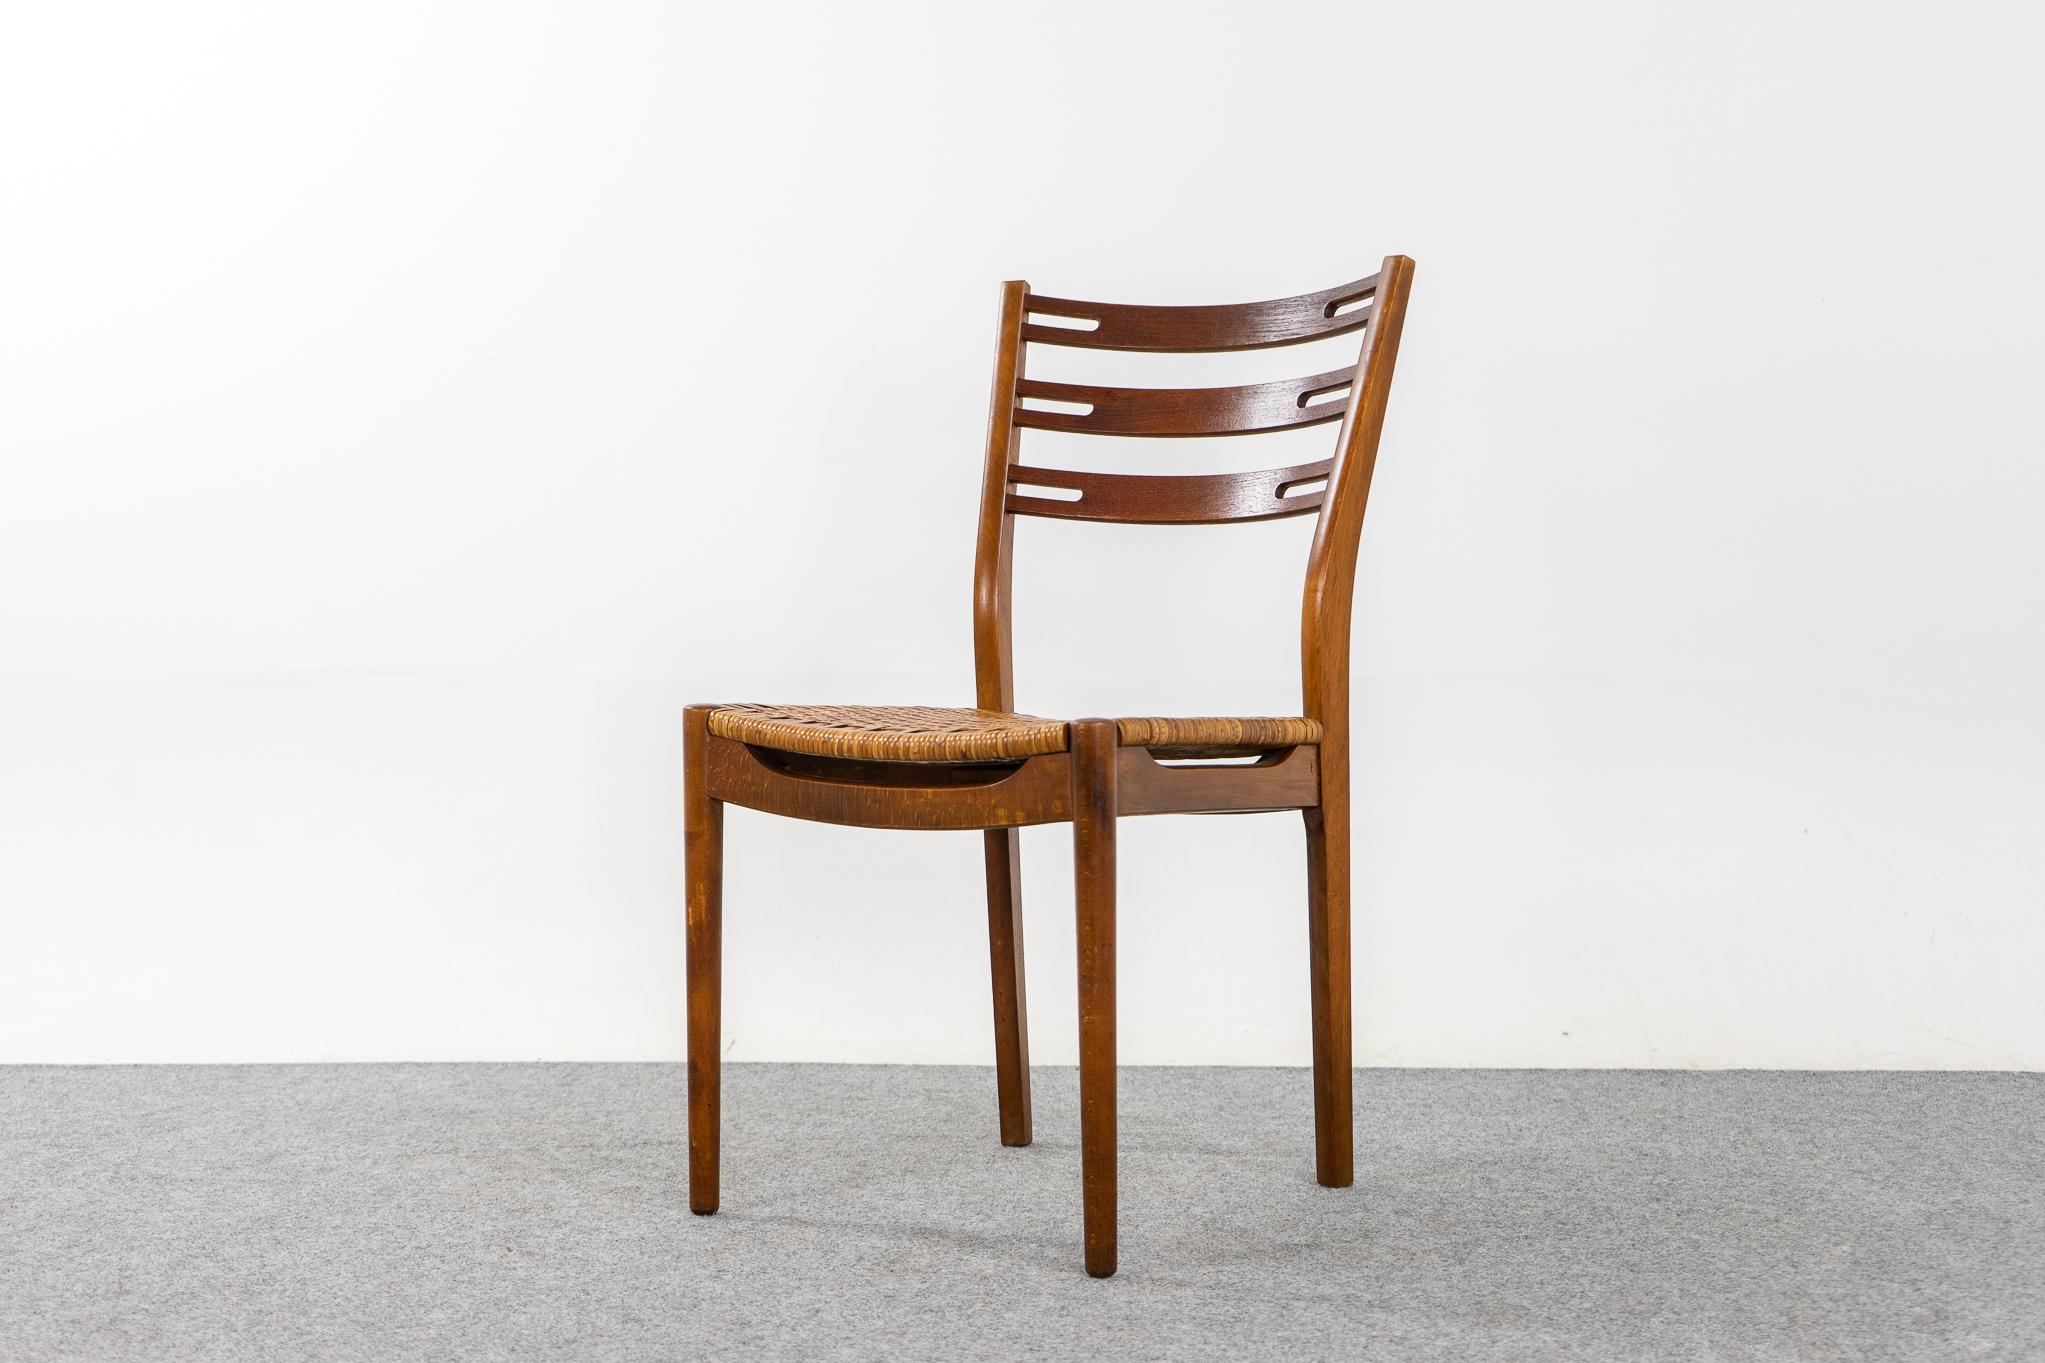 Teak and rattan Della dining chairs by IKEA, circa 1960's. Beautifully curved backrests and generous seat design provide support and comfort. Solid beech frame features slatted teak back. Original rattan seats in good condition.

Unrestored item,